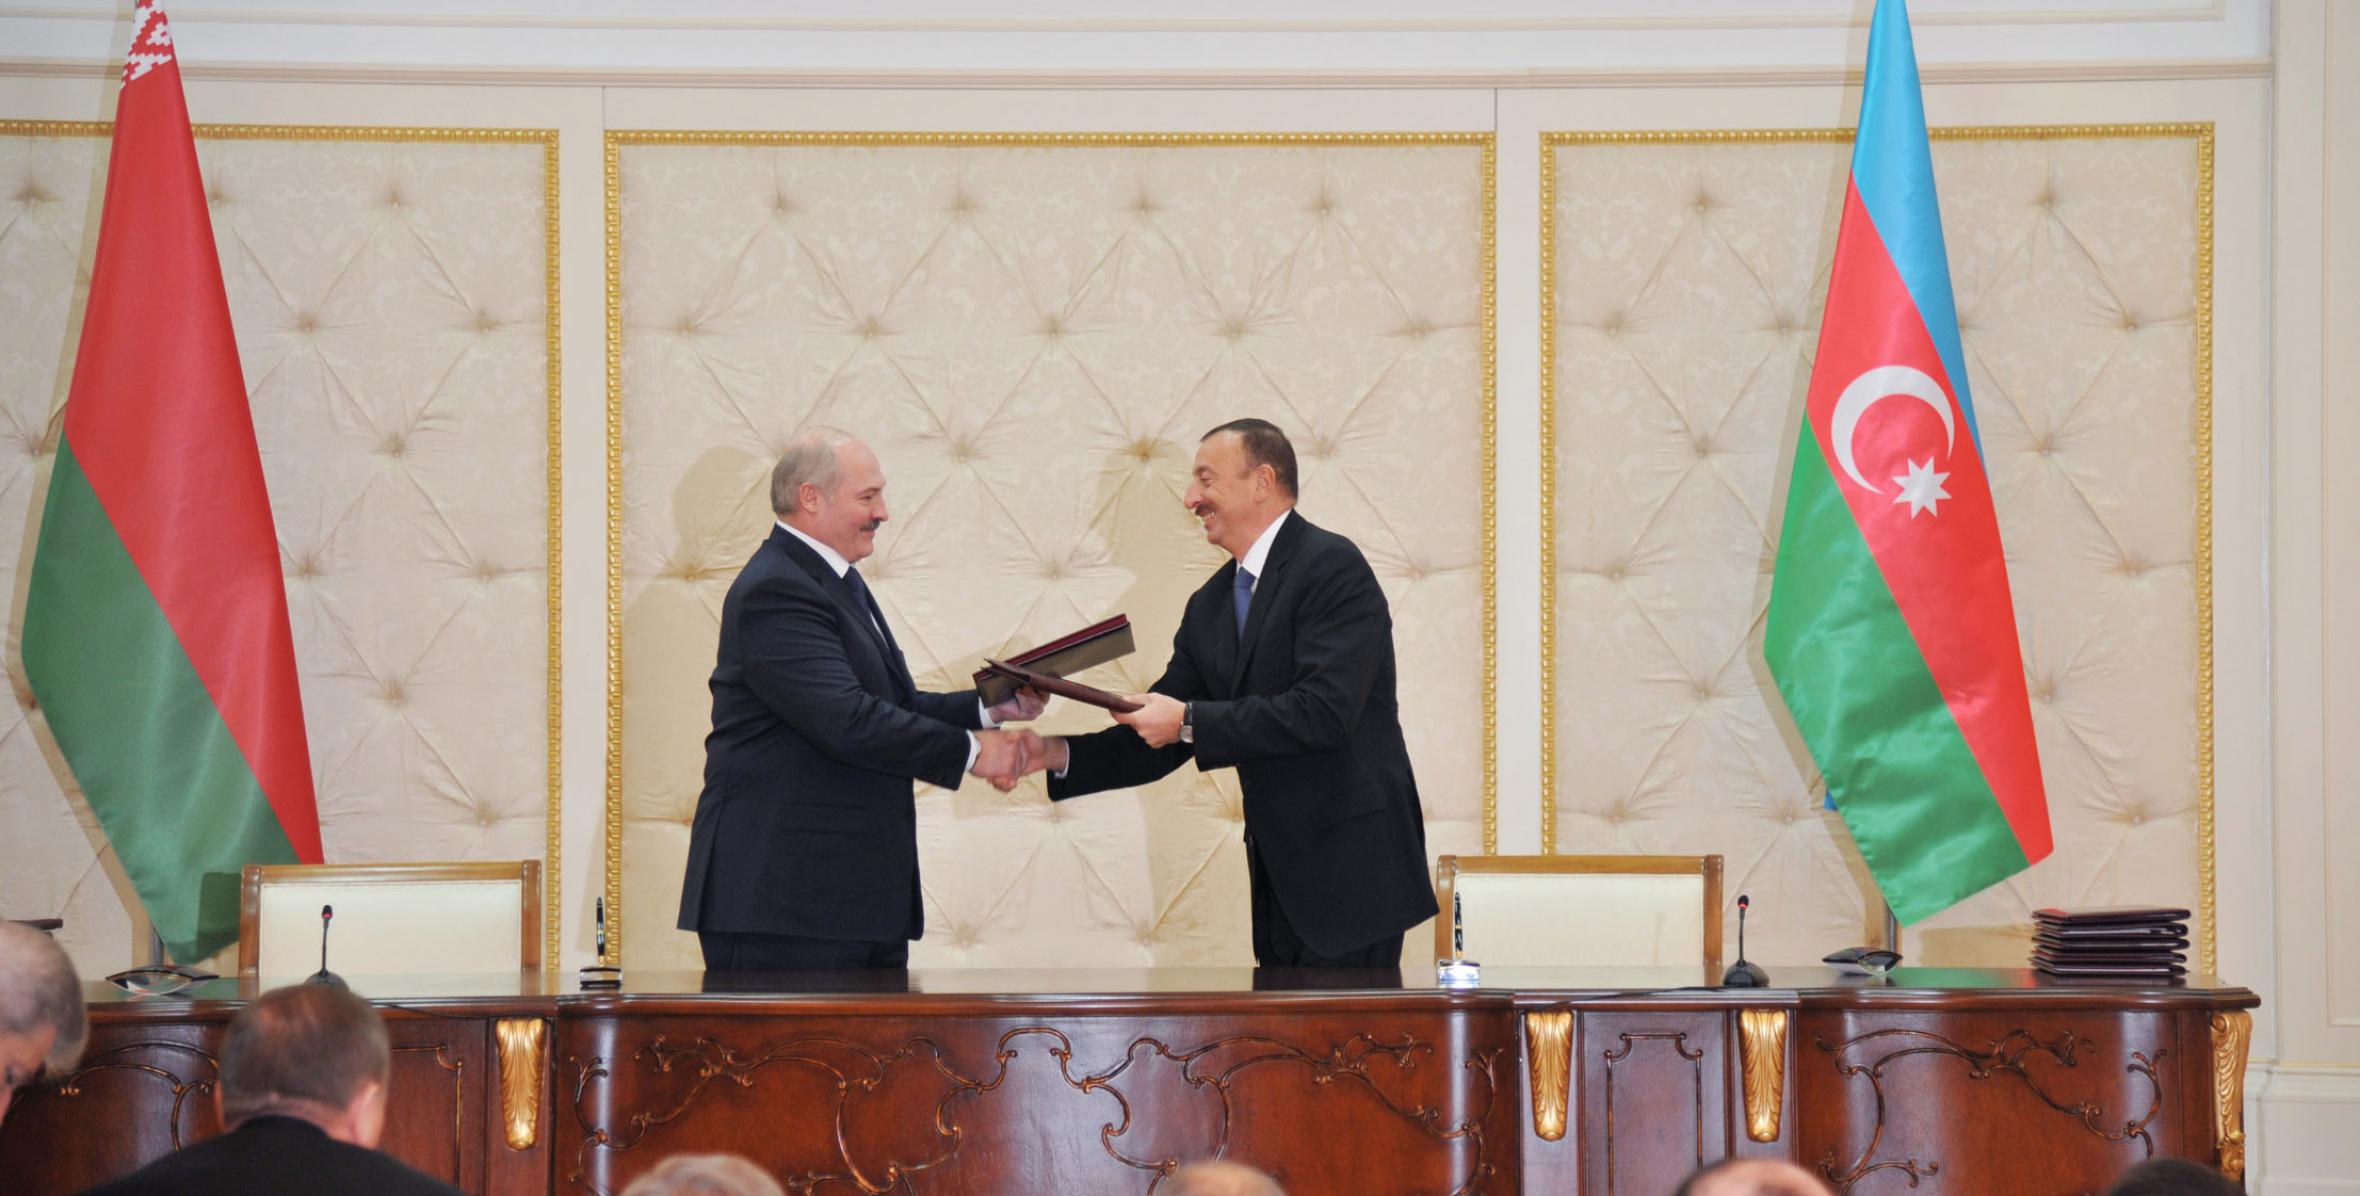 A ceremony has been held to sign Azerbaijani-Belarusian documents